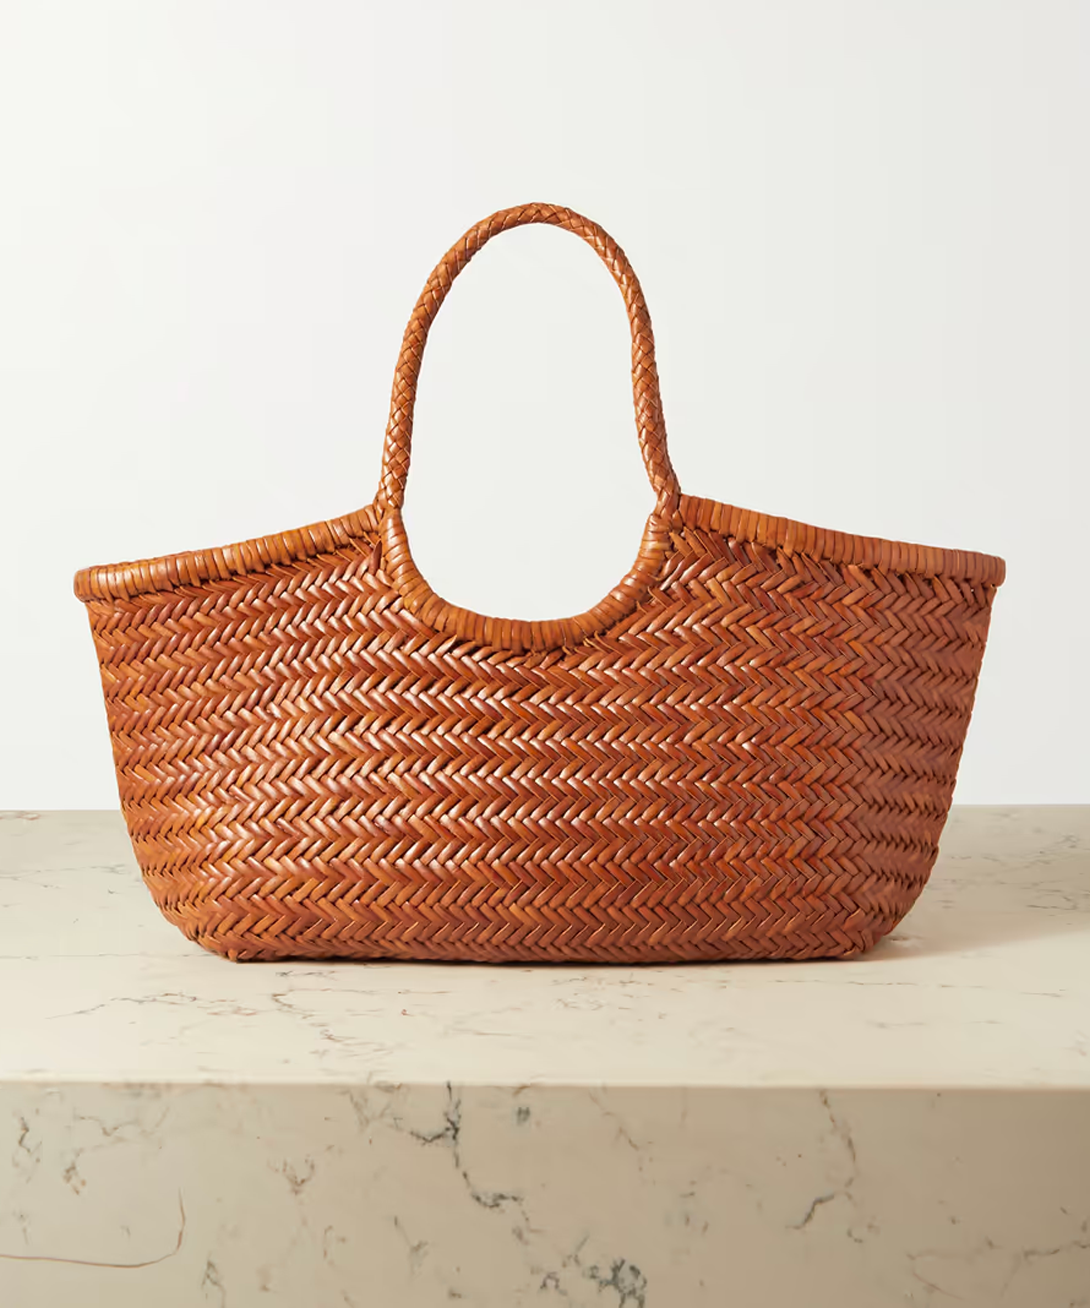 DRAGON DIFFUSION Nantucket large woven leather tote